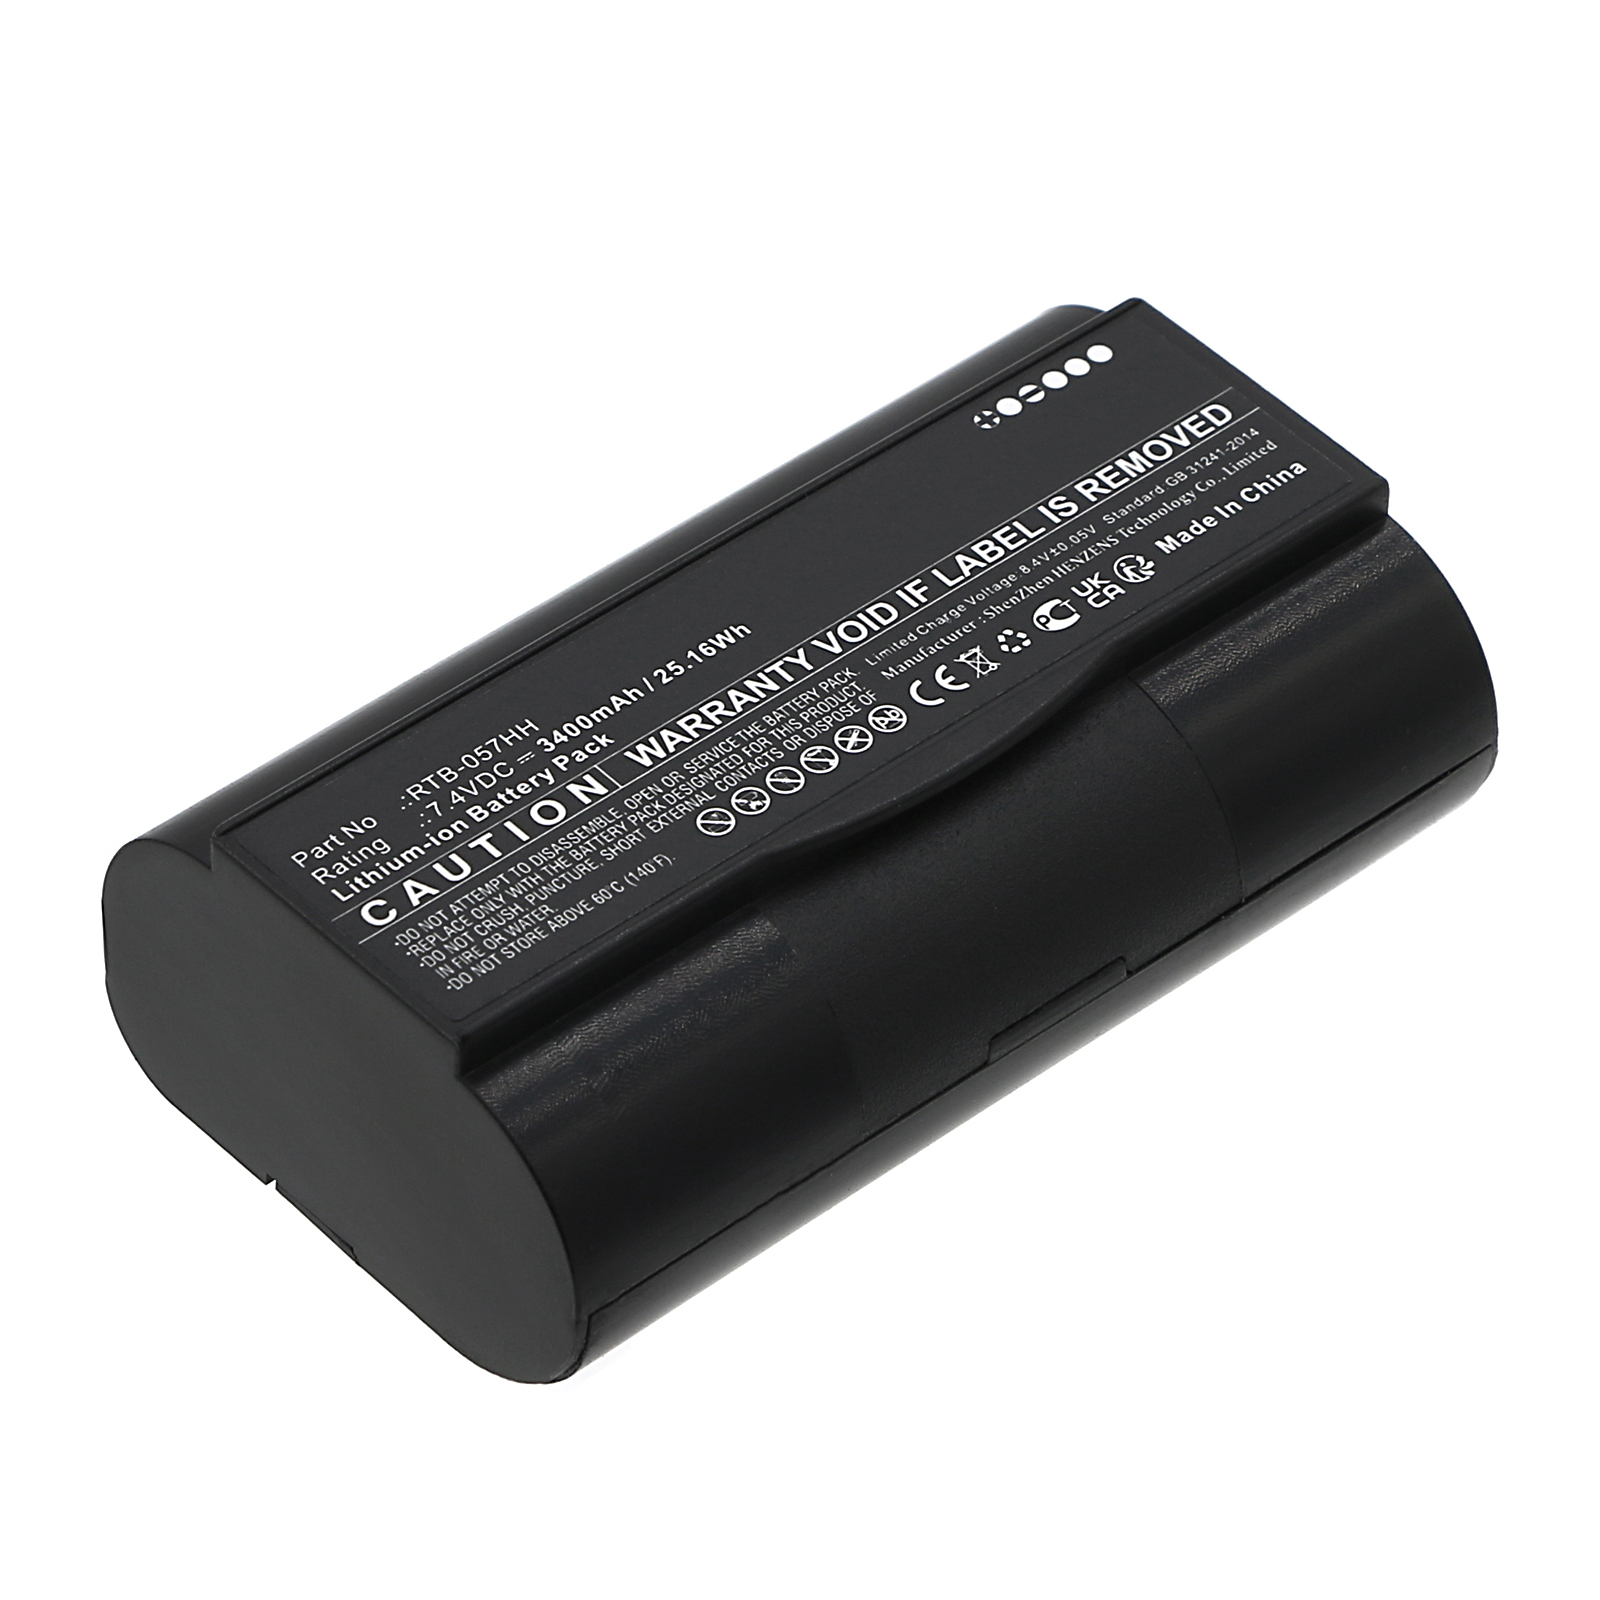 Synergy Digital Tablet Battery, Compatible with WINMATE RTB-057HH Tablet Battery (Li-ion, 7.4V, 3400mAh)